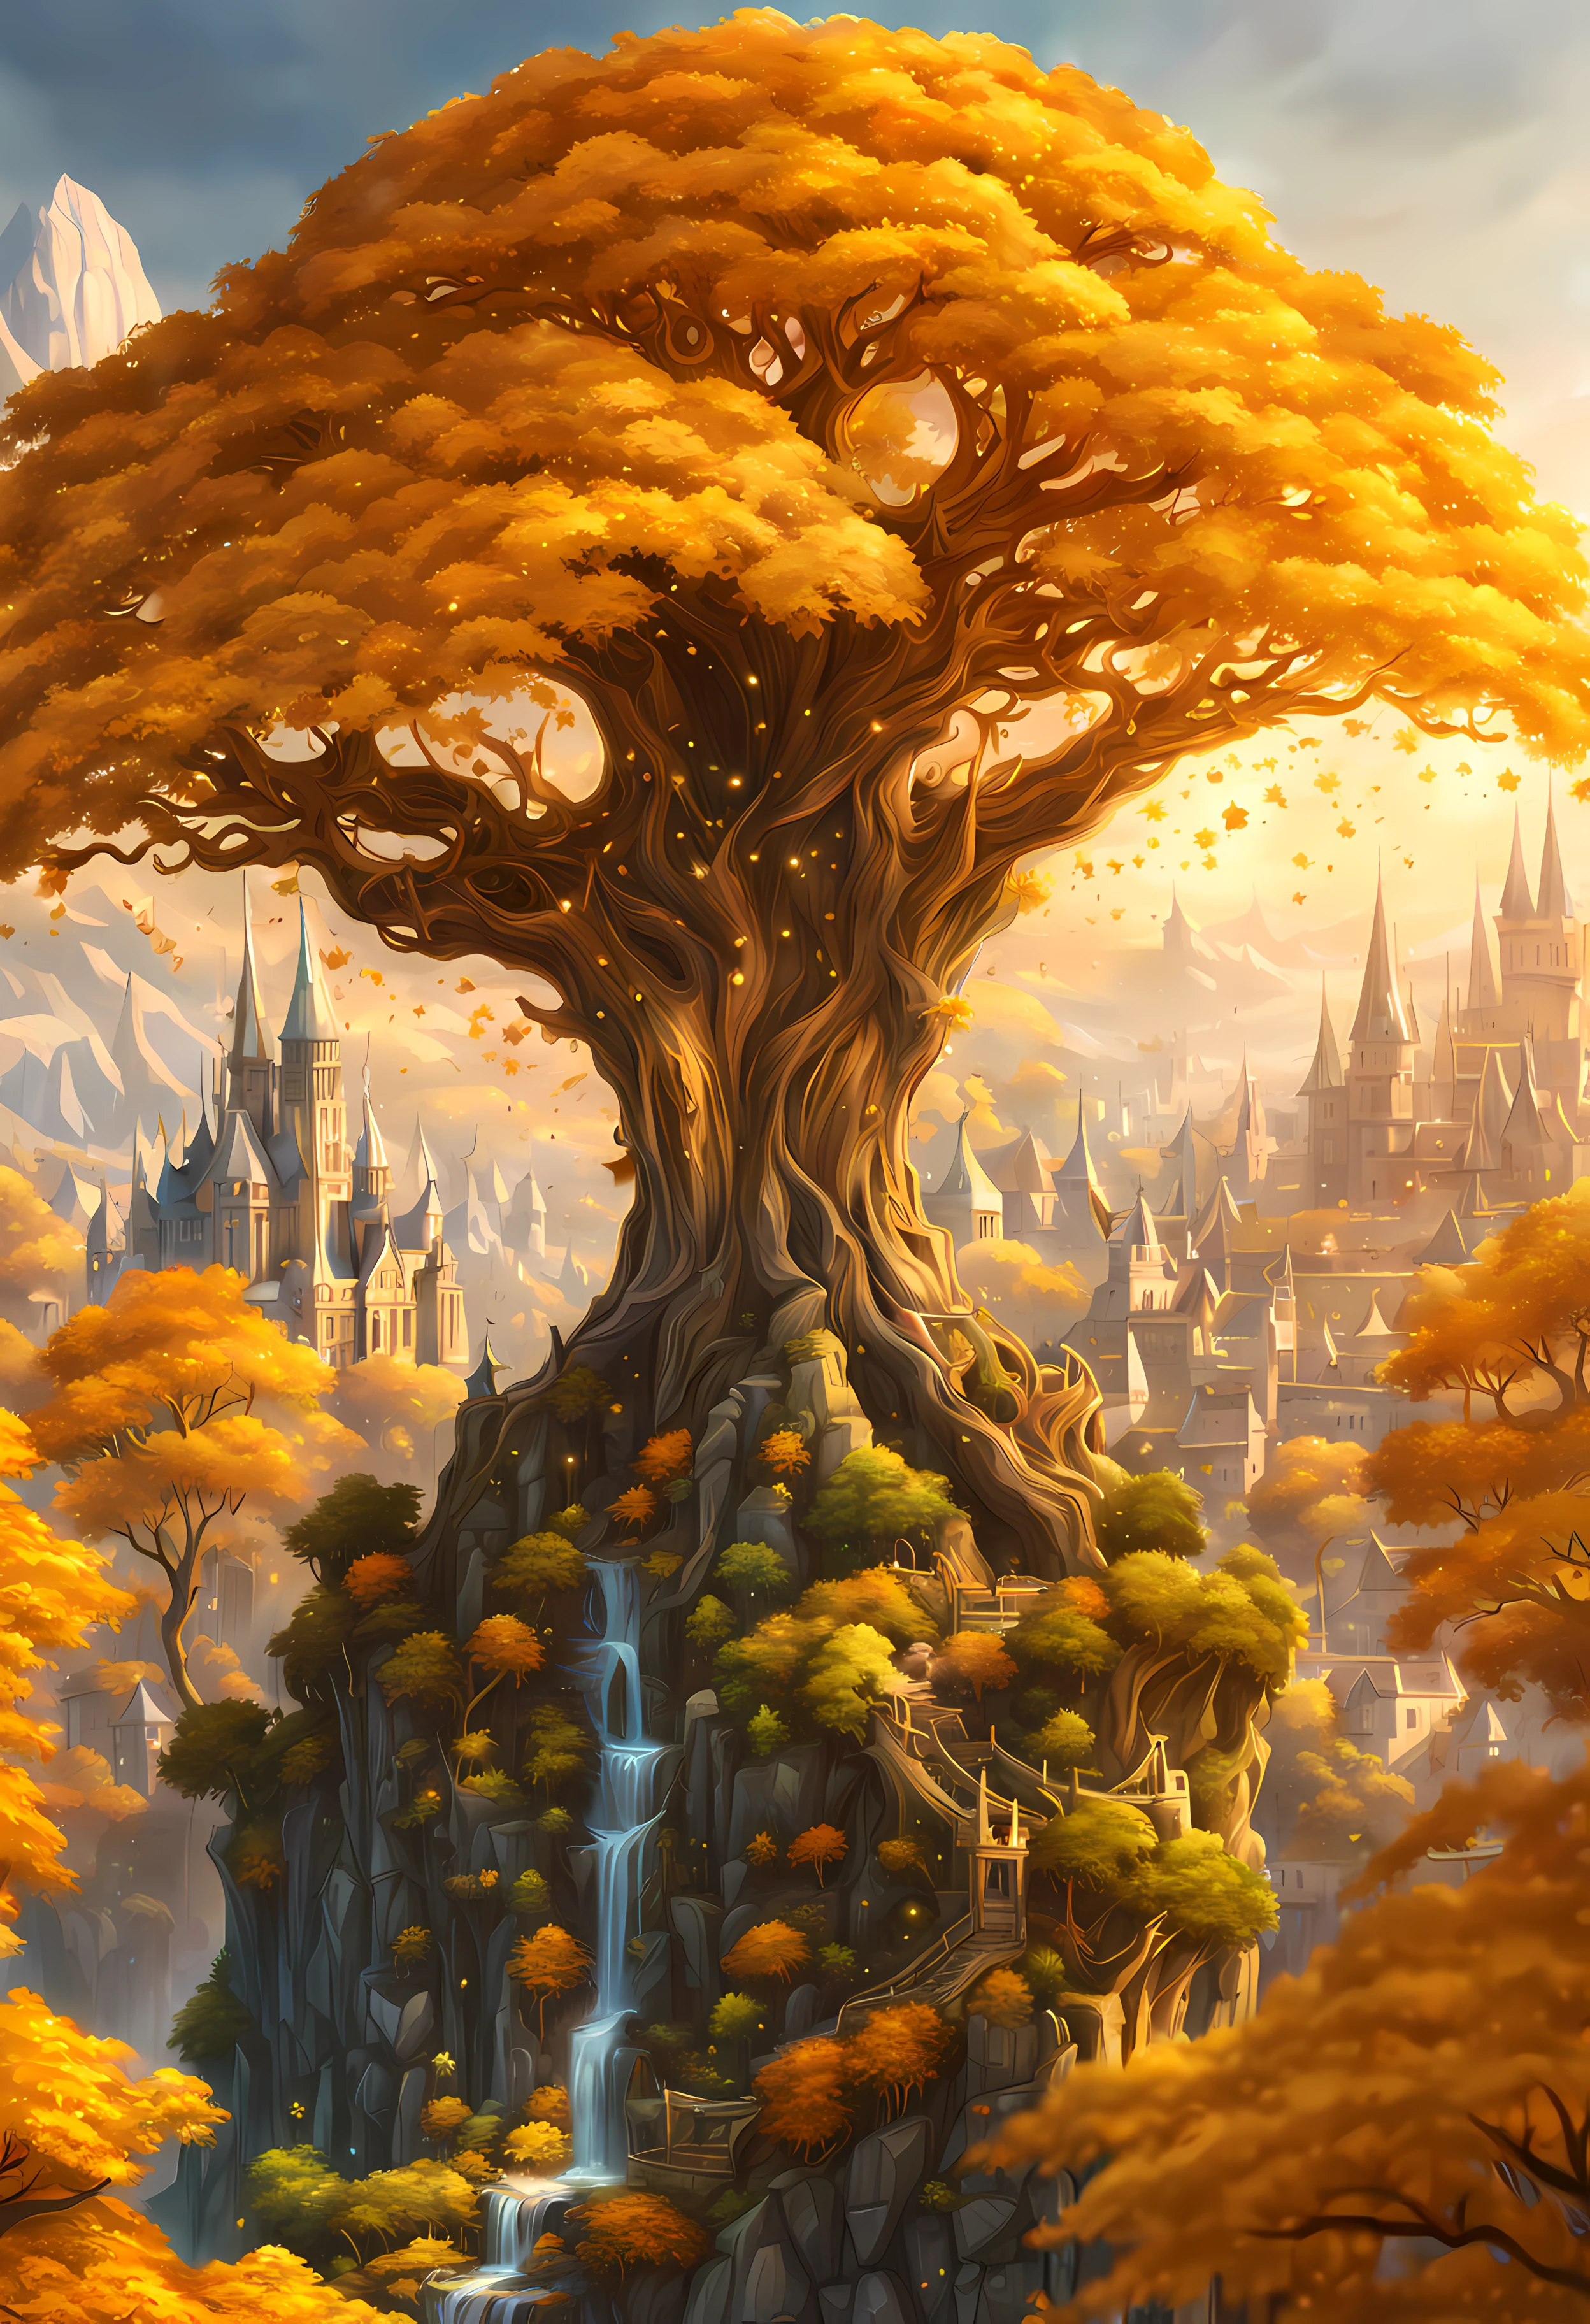 Unparalleled masterpiece, 16k, ultra detailed, approaching perfection, (cartoon style:1.3) | A colossal magical (elven world tree) amidst an ancient elven city. | The world tree stands (tall), with branches reaching towards the sky and glowing ((golden leaves that emit a soft ethereal light)). | The distant view capturing the grandeur of the world tree against the backdrop of the magnificent elven city. | The city is filled with intricate elven architecture showcasing rich history and enchanting beauty of the (elegant) civilization. | The scene takes place during breathtaking night with (shimmering stars) adding a touch of (mysticism and wonder) | More Detail